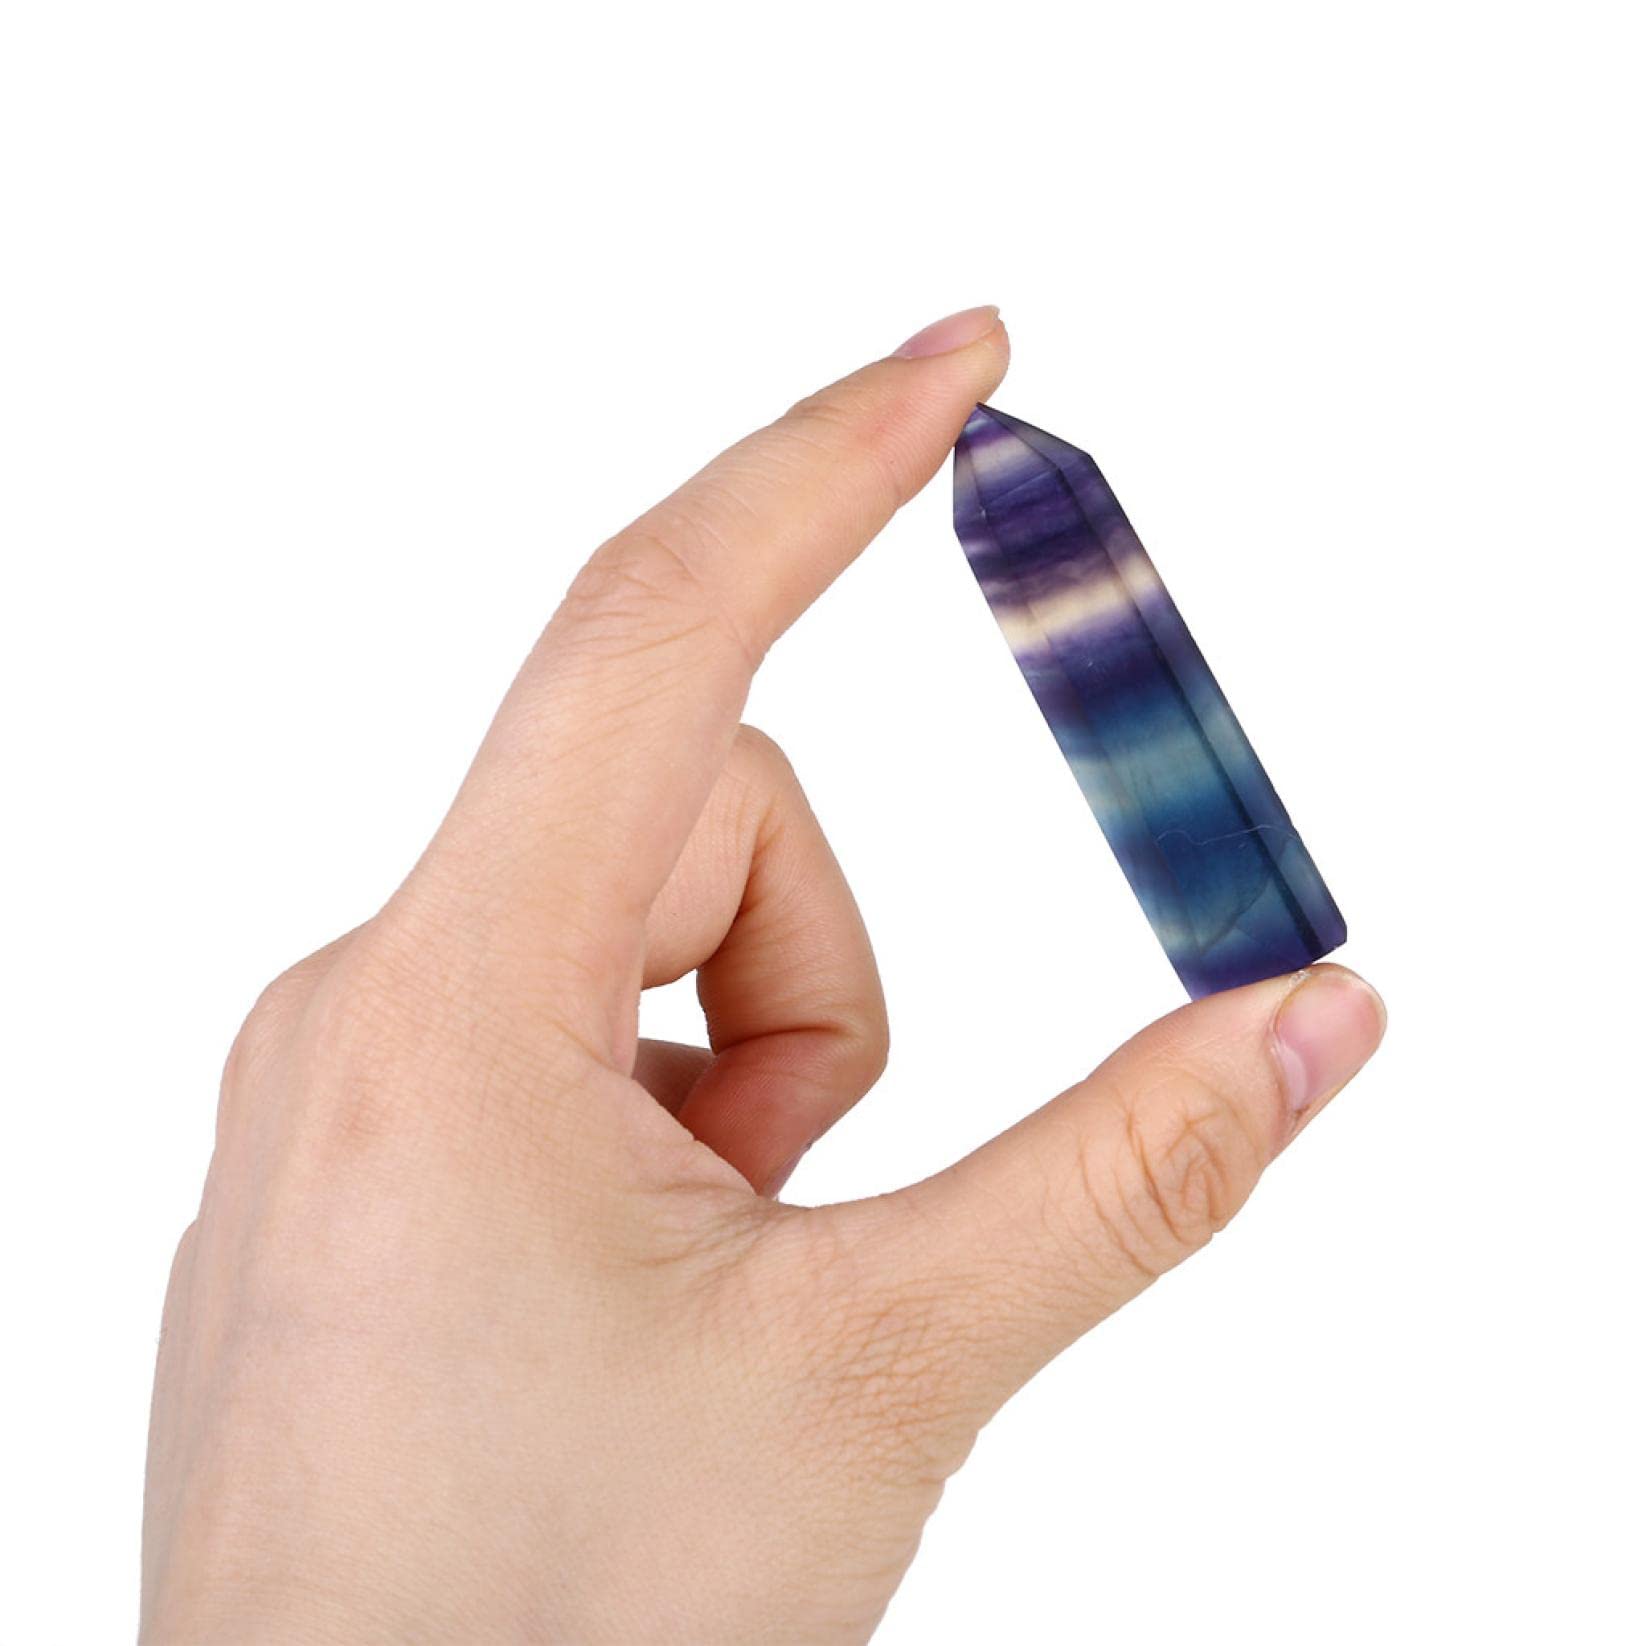 Larse Natural Fluorite Quartz Crystal Stone, Healing Amethyst Hexagonal Wand, Eliminate The Negative Energy Accumulation in The Body & Remove The Bad Luck, 1.77''~2.56''